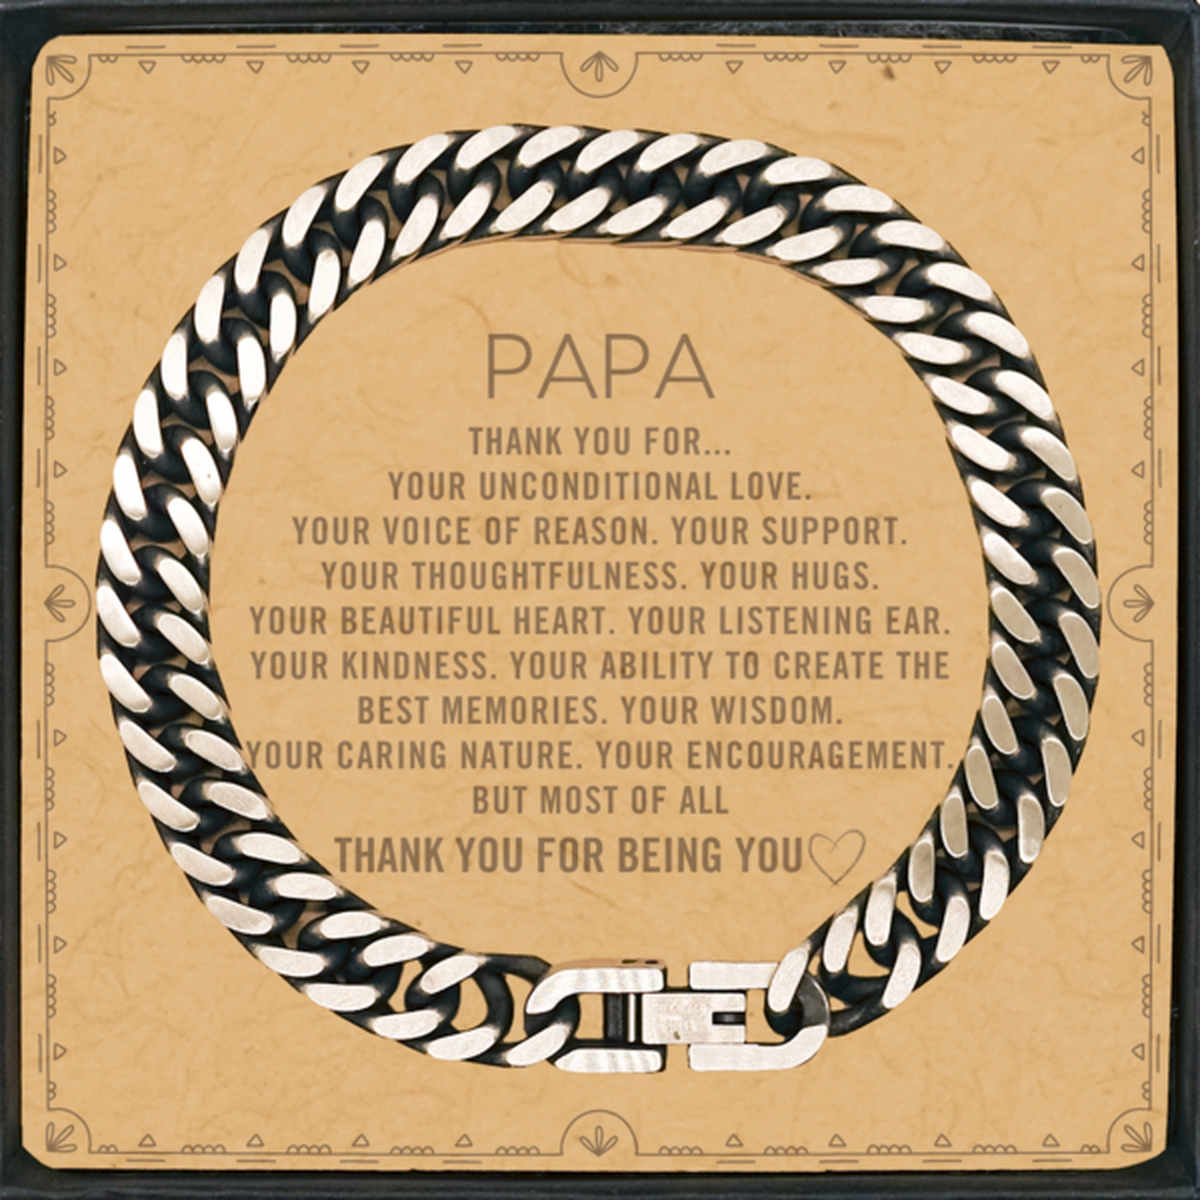 Papa Cuban Link Chain Bracelet Custom, Message Card Gifts For Papa Christmas Graduation Birthday Gifts for Men Women Papa Thank you for Your unconditional love